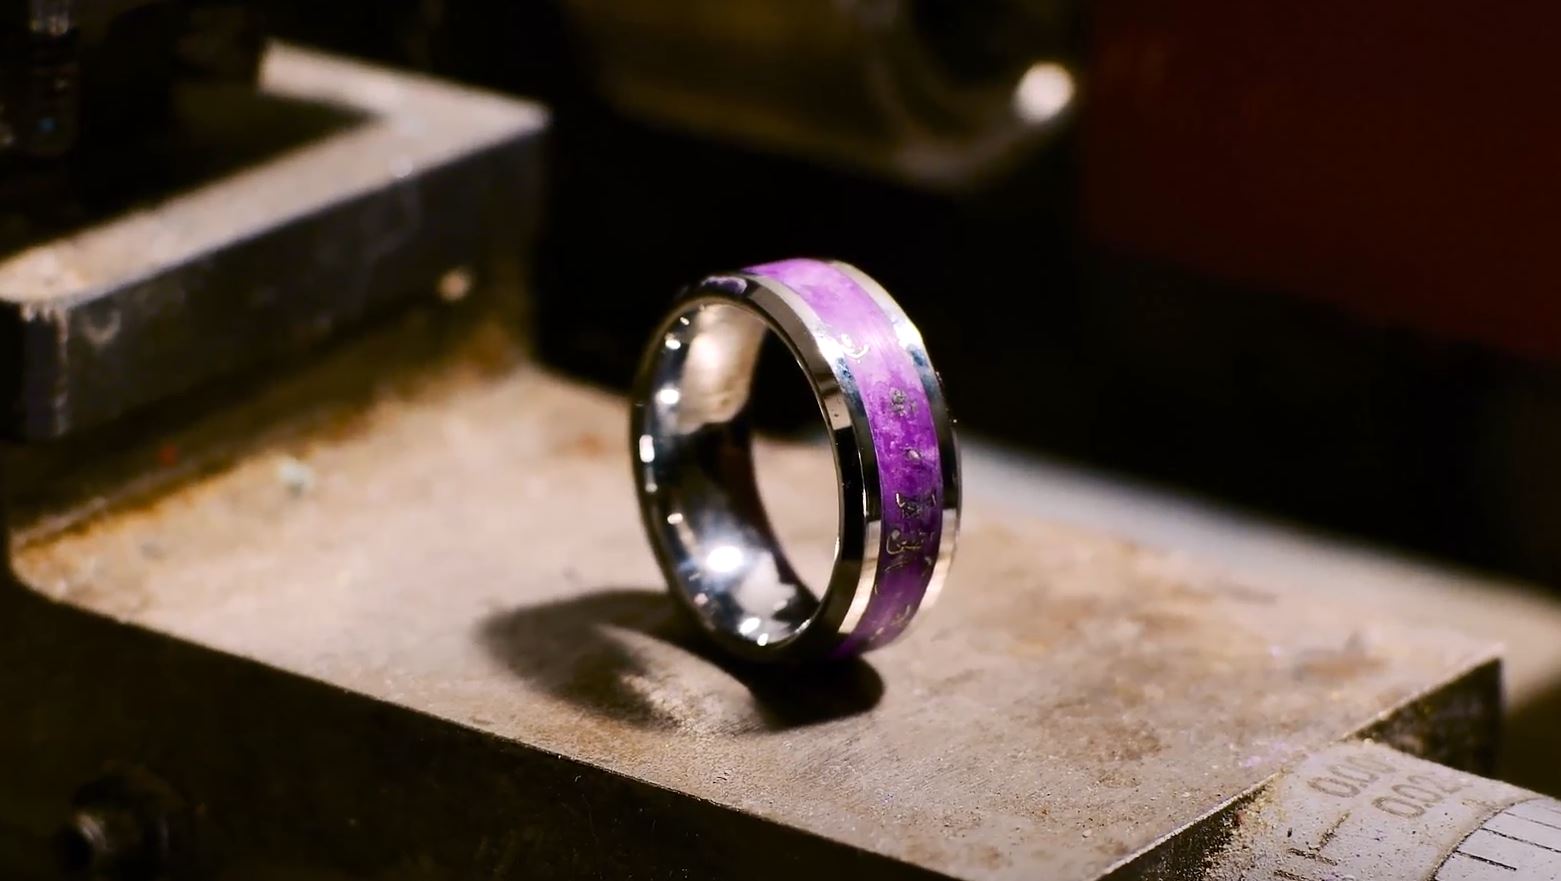 Making a Titanium Infused Carbon Fiber and Lava Glow Liner Ring | Patrick  Adair Designs - YouTube